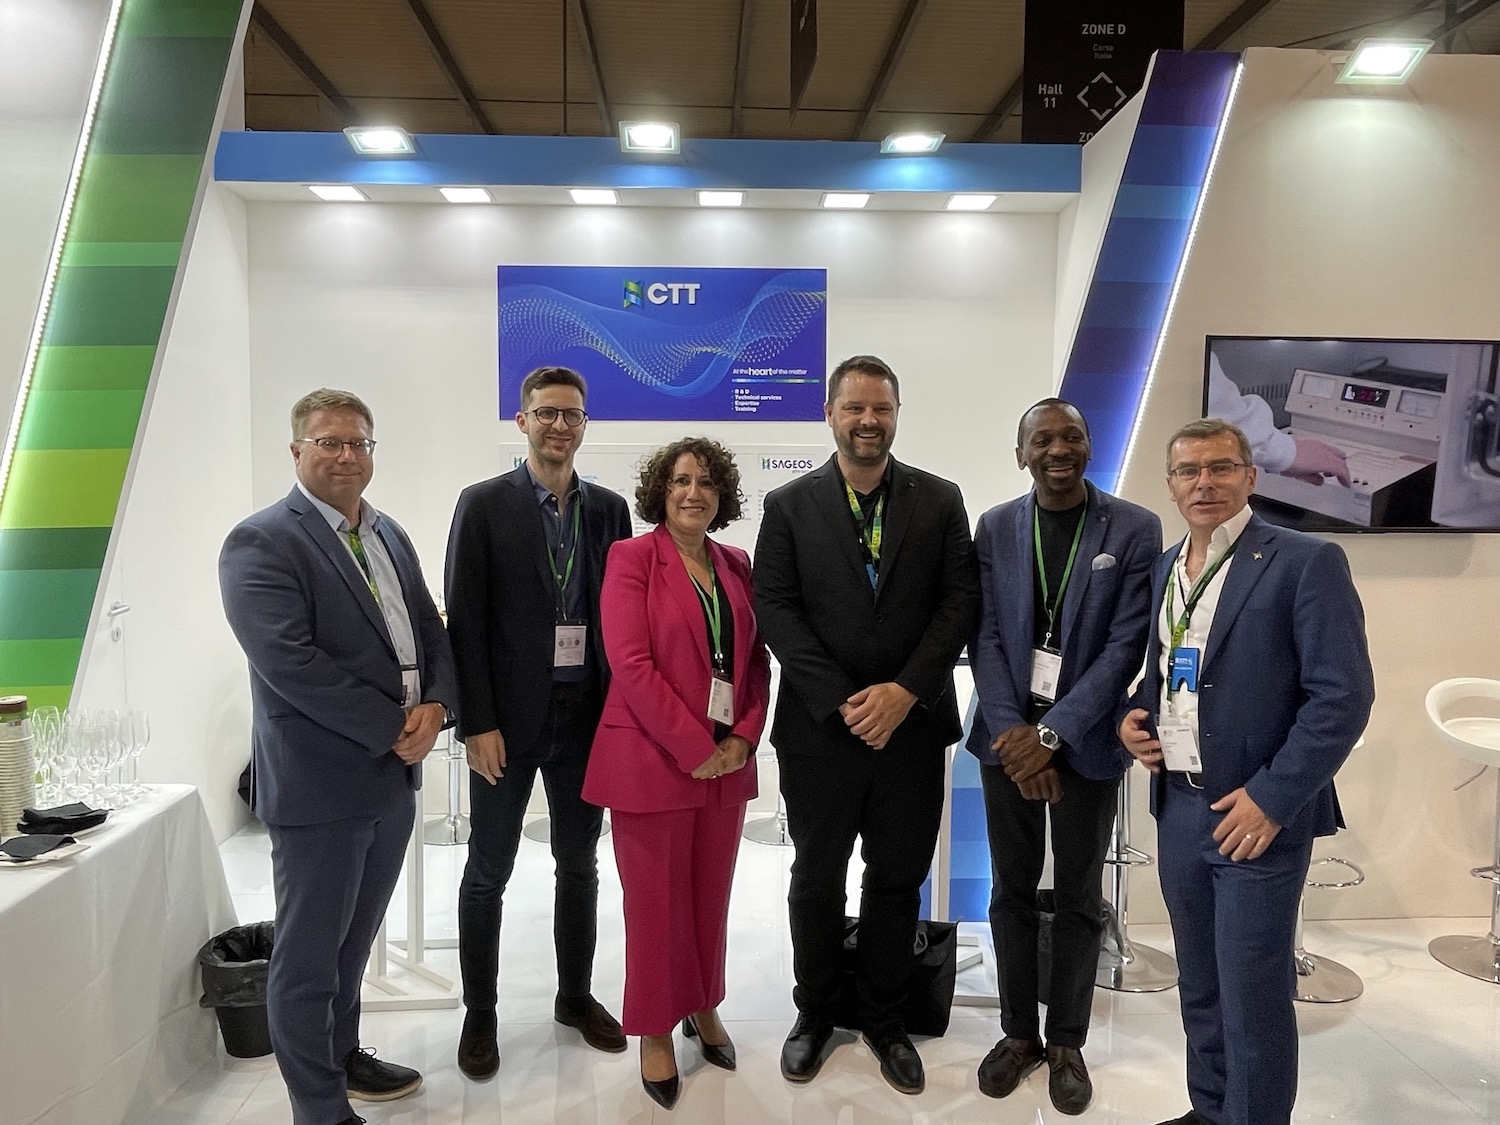 From left to right: Dany Charest, General Manager of TechniTextile Québec; Simone Grassi, Trade Commissioner at Embassy of Canada to Italy; Paulette Kaci, Executive Director of Vestechpro; Mathieu St-Arnaud Lavoie, executive director of mmode; Ralph Maloumby Baka, Research and Innovation Attaché of Gouvernement du Québec in Italy; and Valerio Izquierdo, Vice-President, Business Development and Partnerships, of CTT Group. © Primacom Inc.